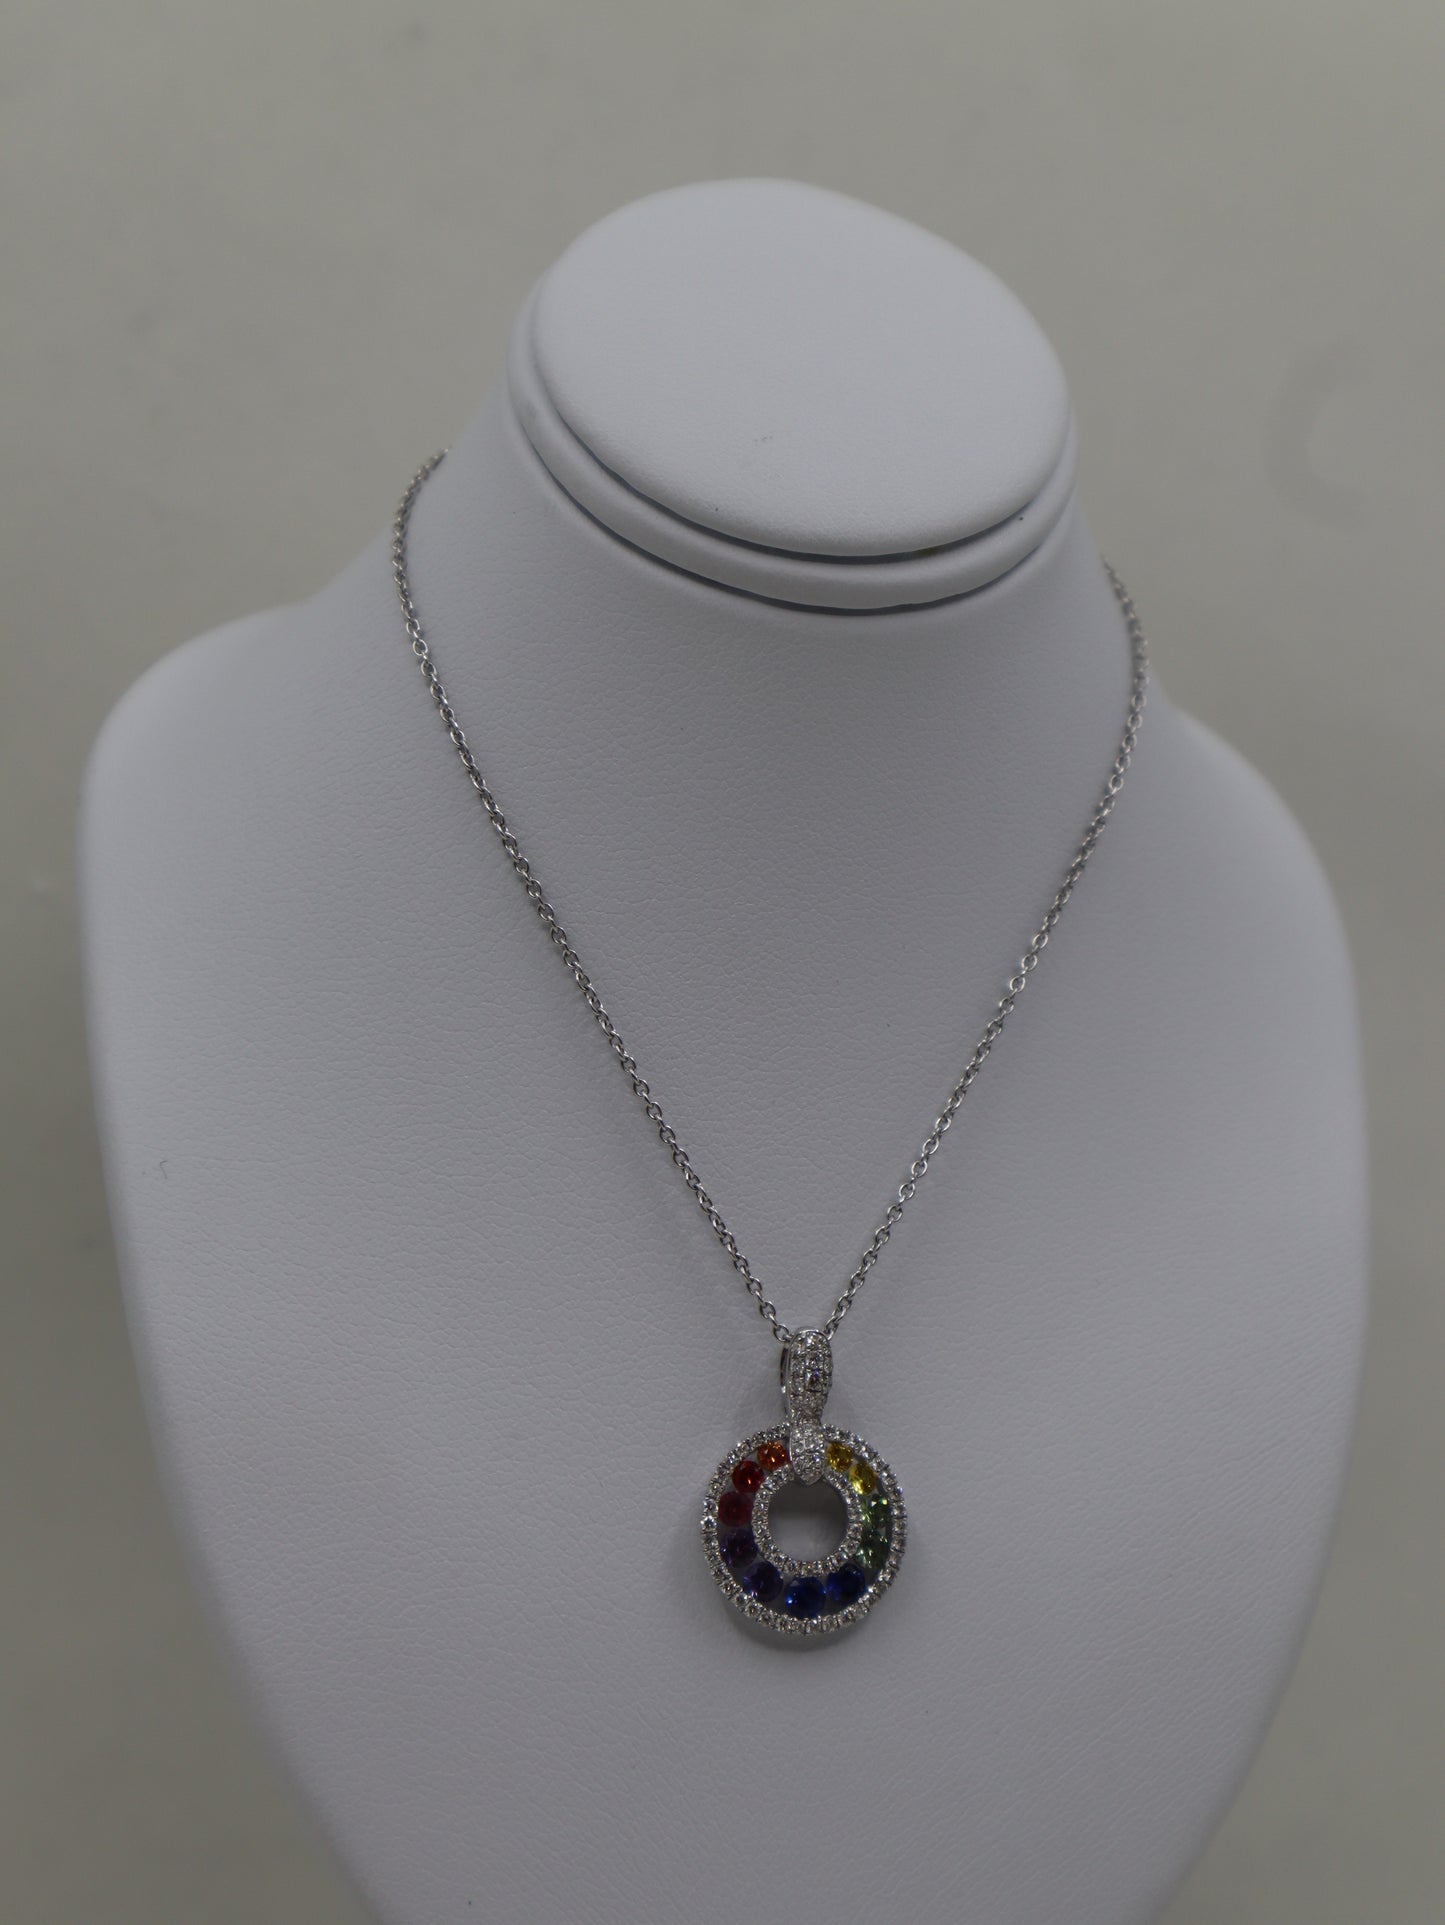 18ct White Gold Rainbow Sapphire and Diamond Pendant and Chain